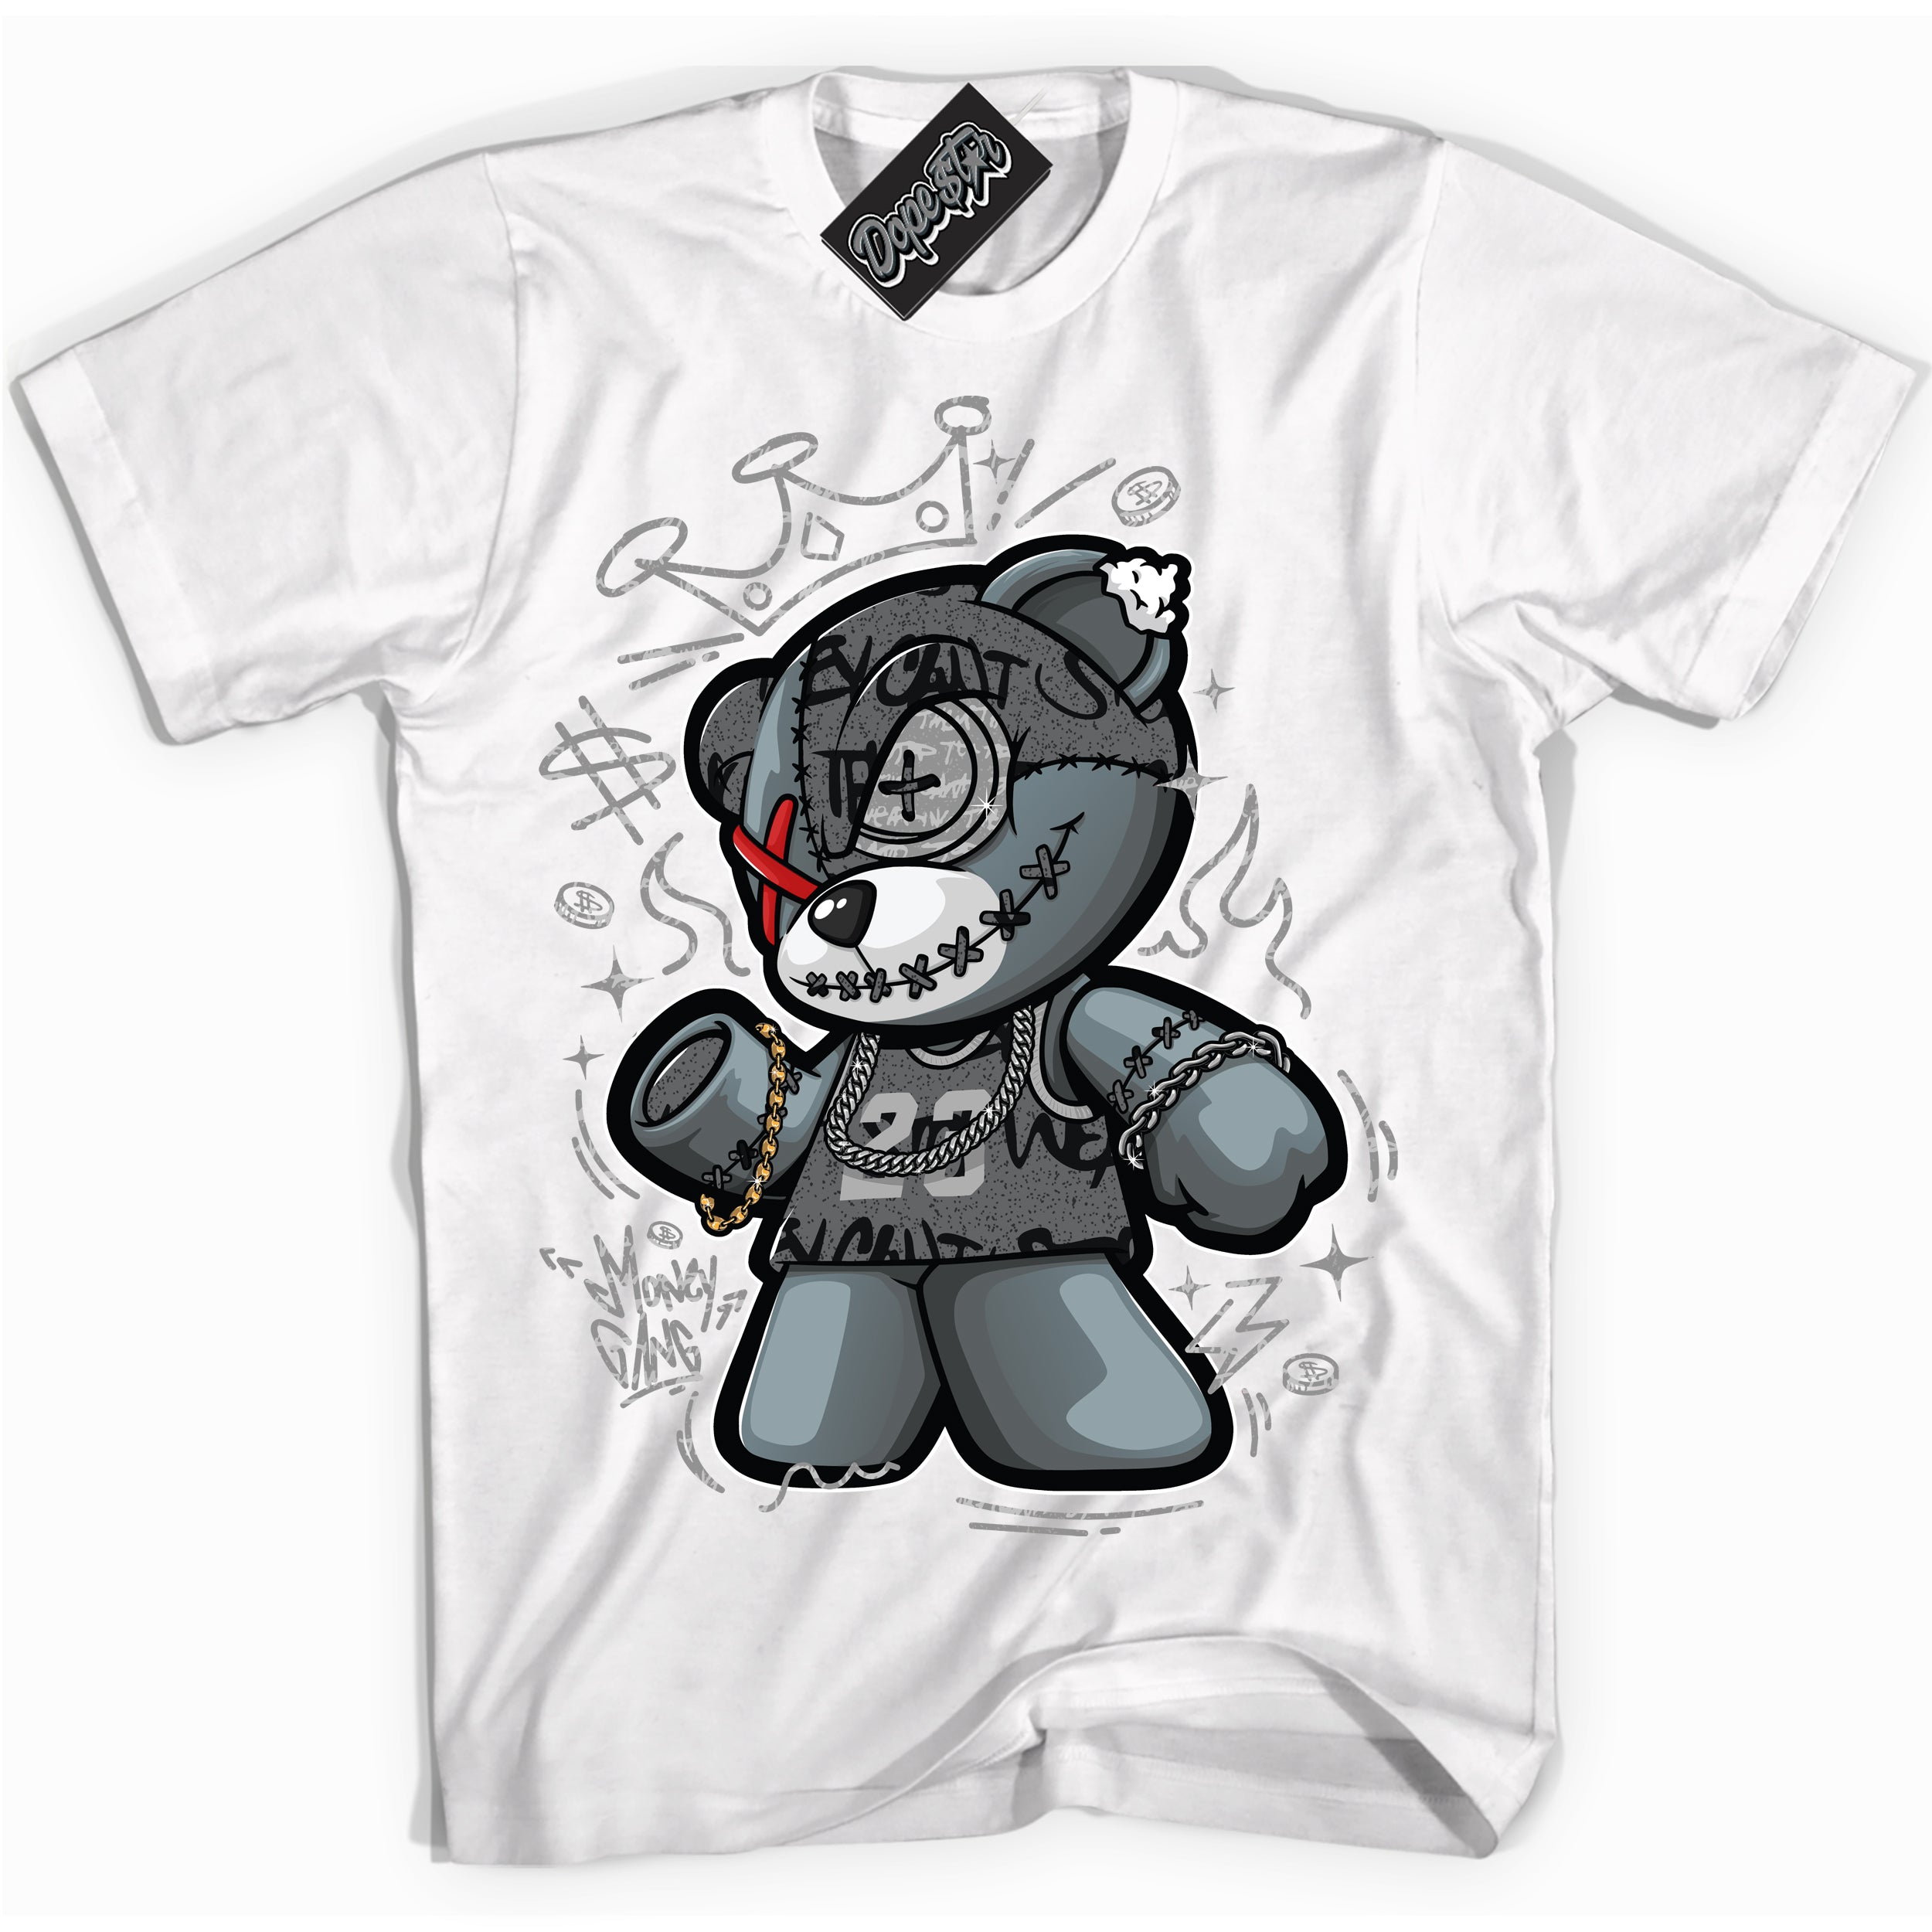 Cool White Shirt with “ Money Gang Bear ” design that perfectly matches Rebellionaire 1s Sneakers.